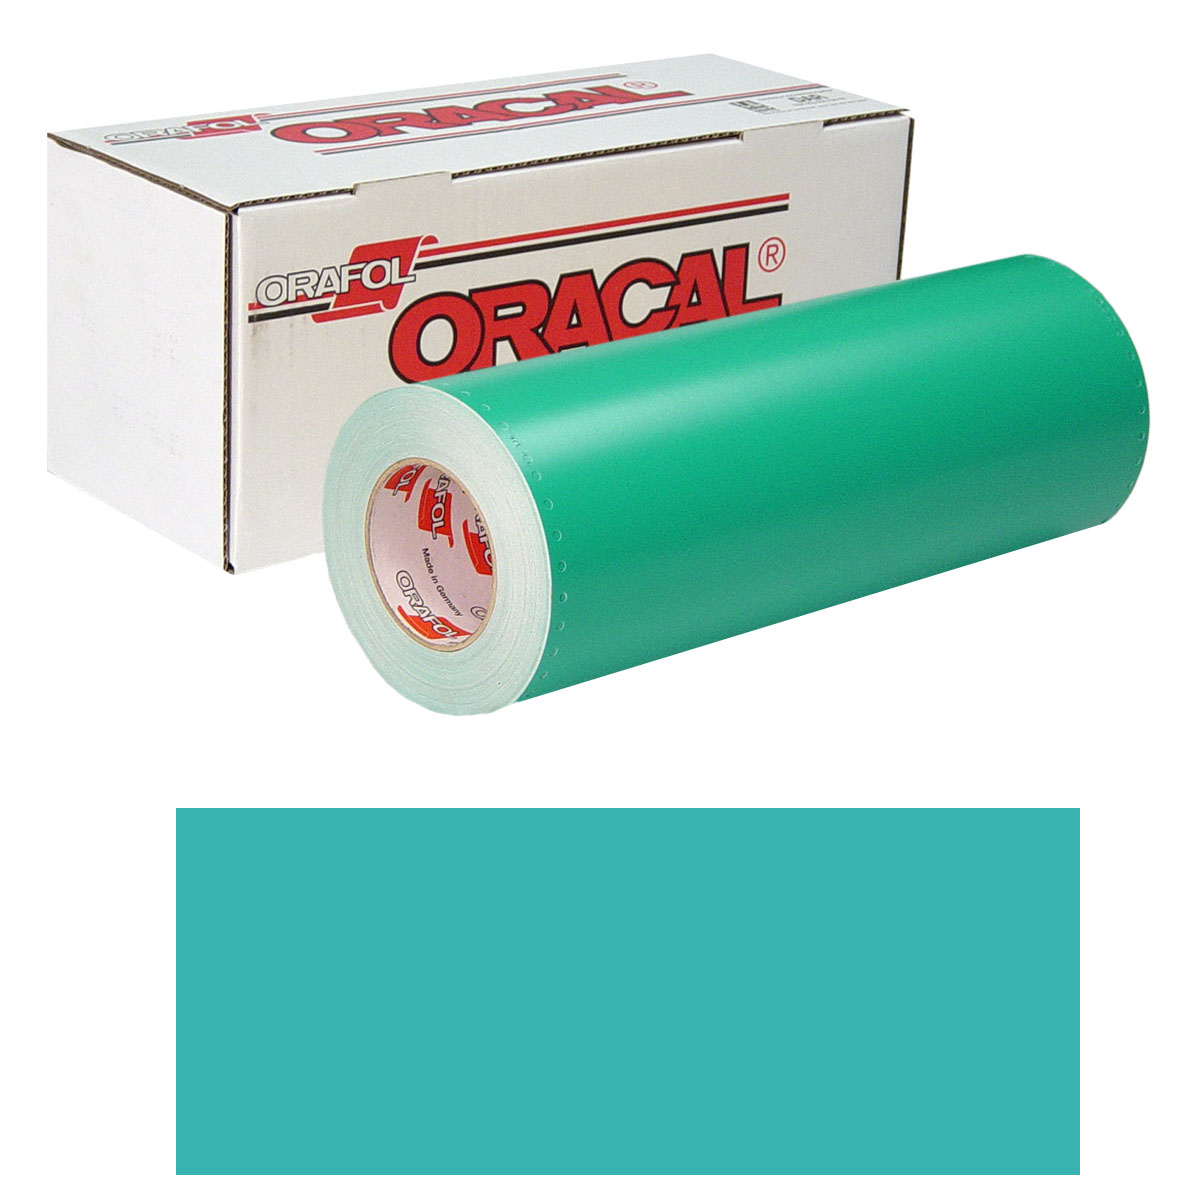 ORACAL 8500 Unp 48in X 50yd 054 Turquoise